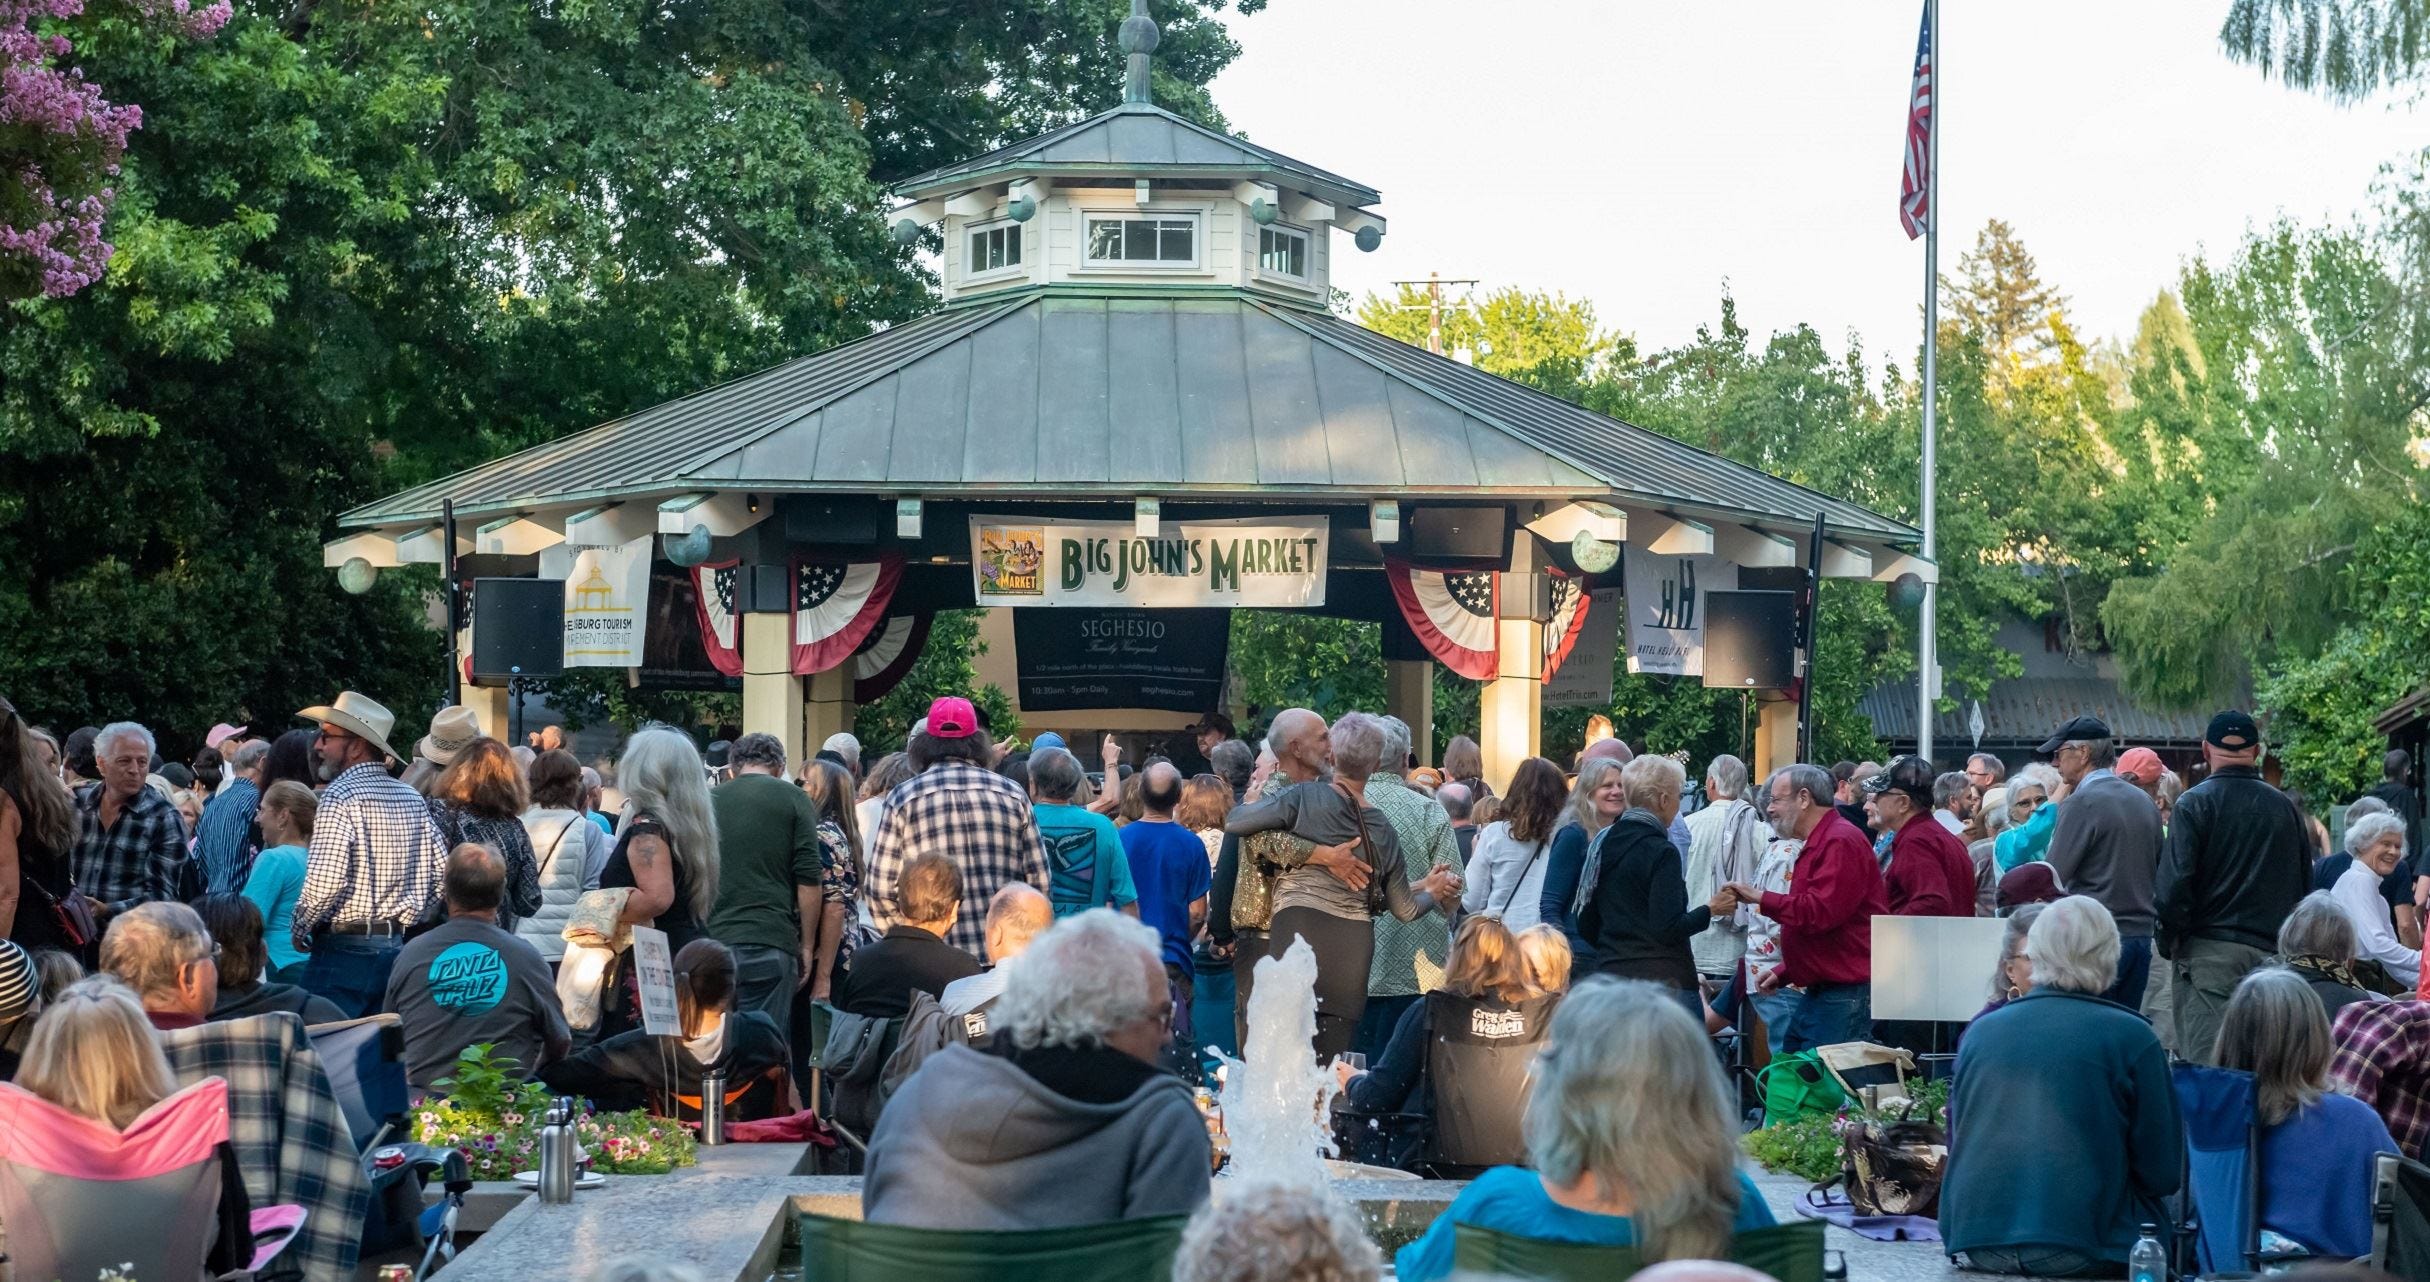 Tuesdays in the Plaza | Healdsburg, CA - Official Website